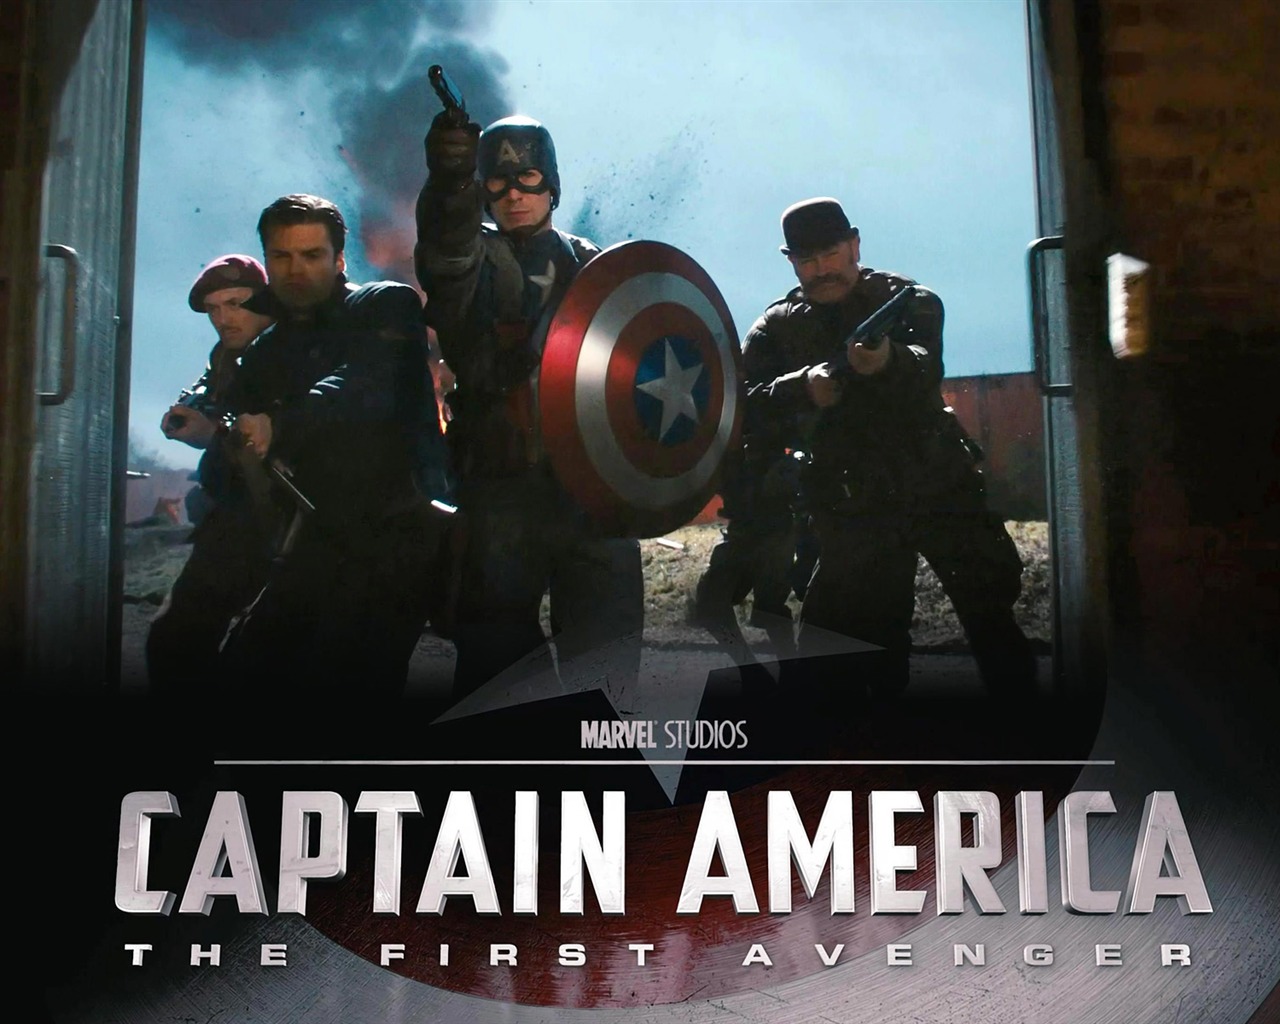 Captain America: The First Avenger wallpapers HD #9 - 1280x1024